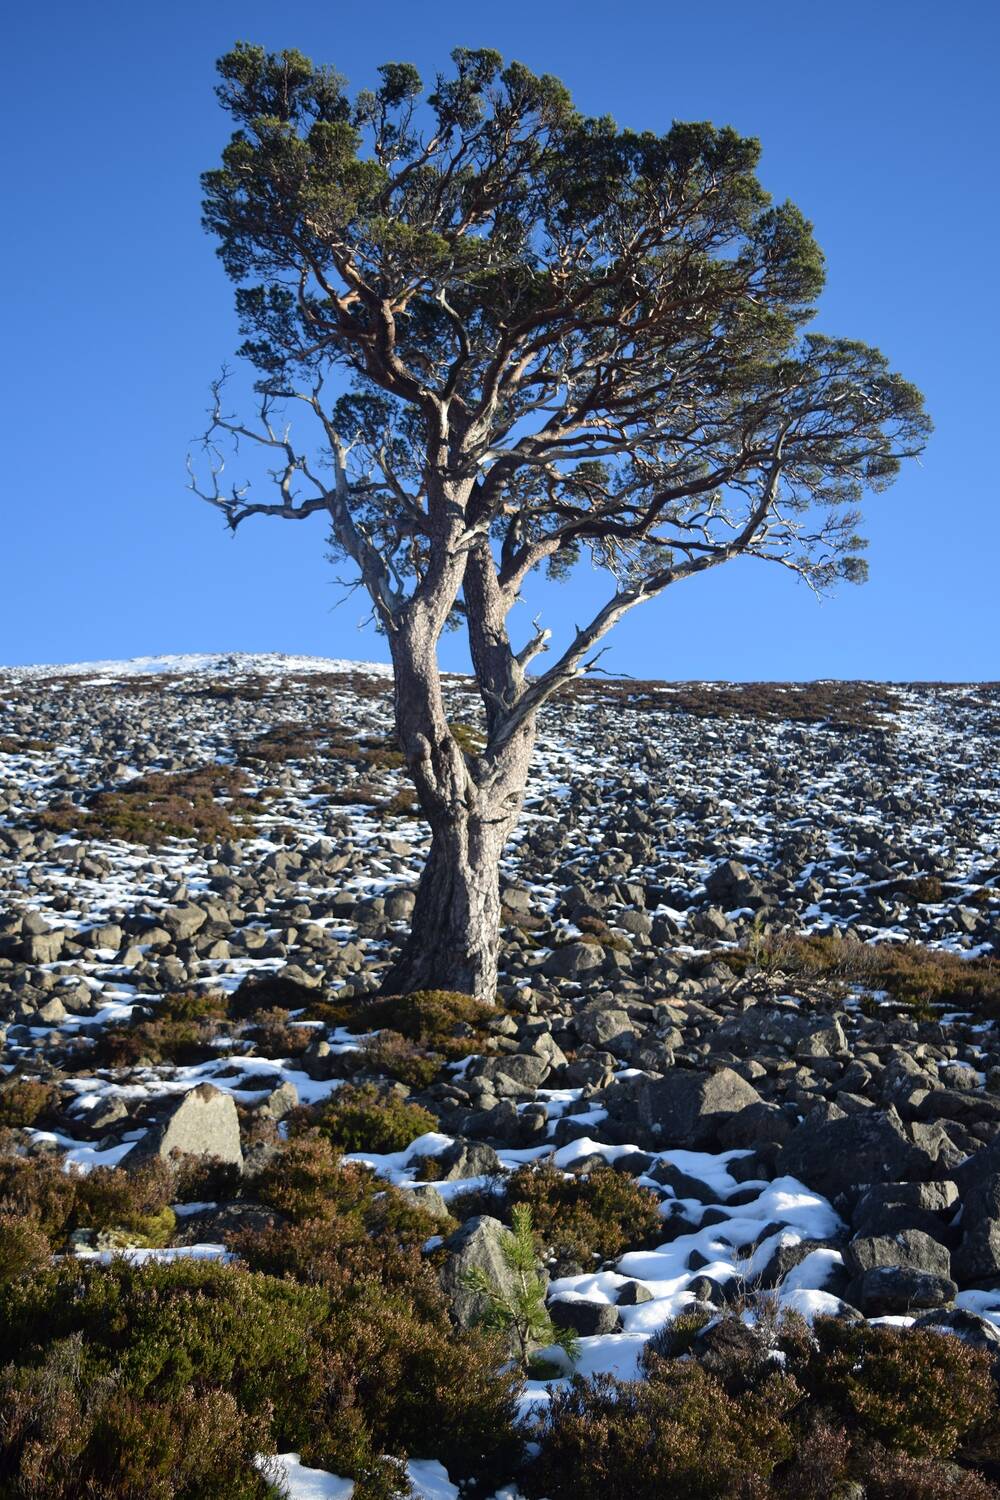 A lone pine tree stands on a moor, silhouetted against a deep blue sky. The rocky ground around it has pockets of snow.